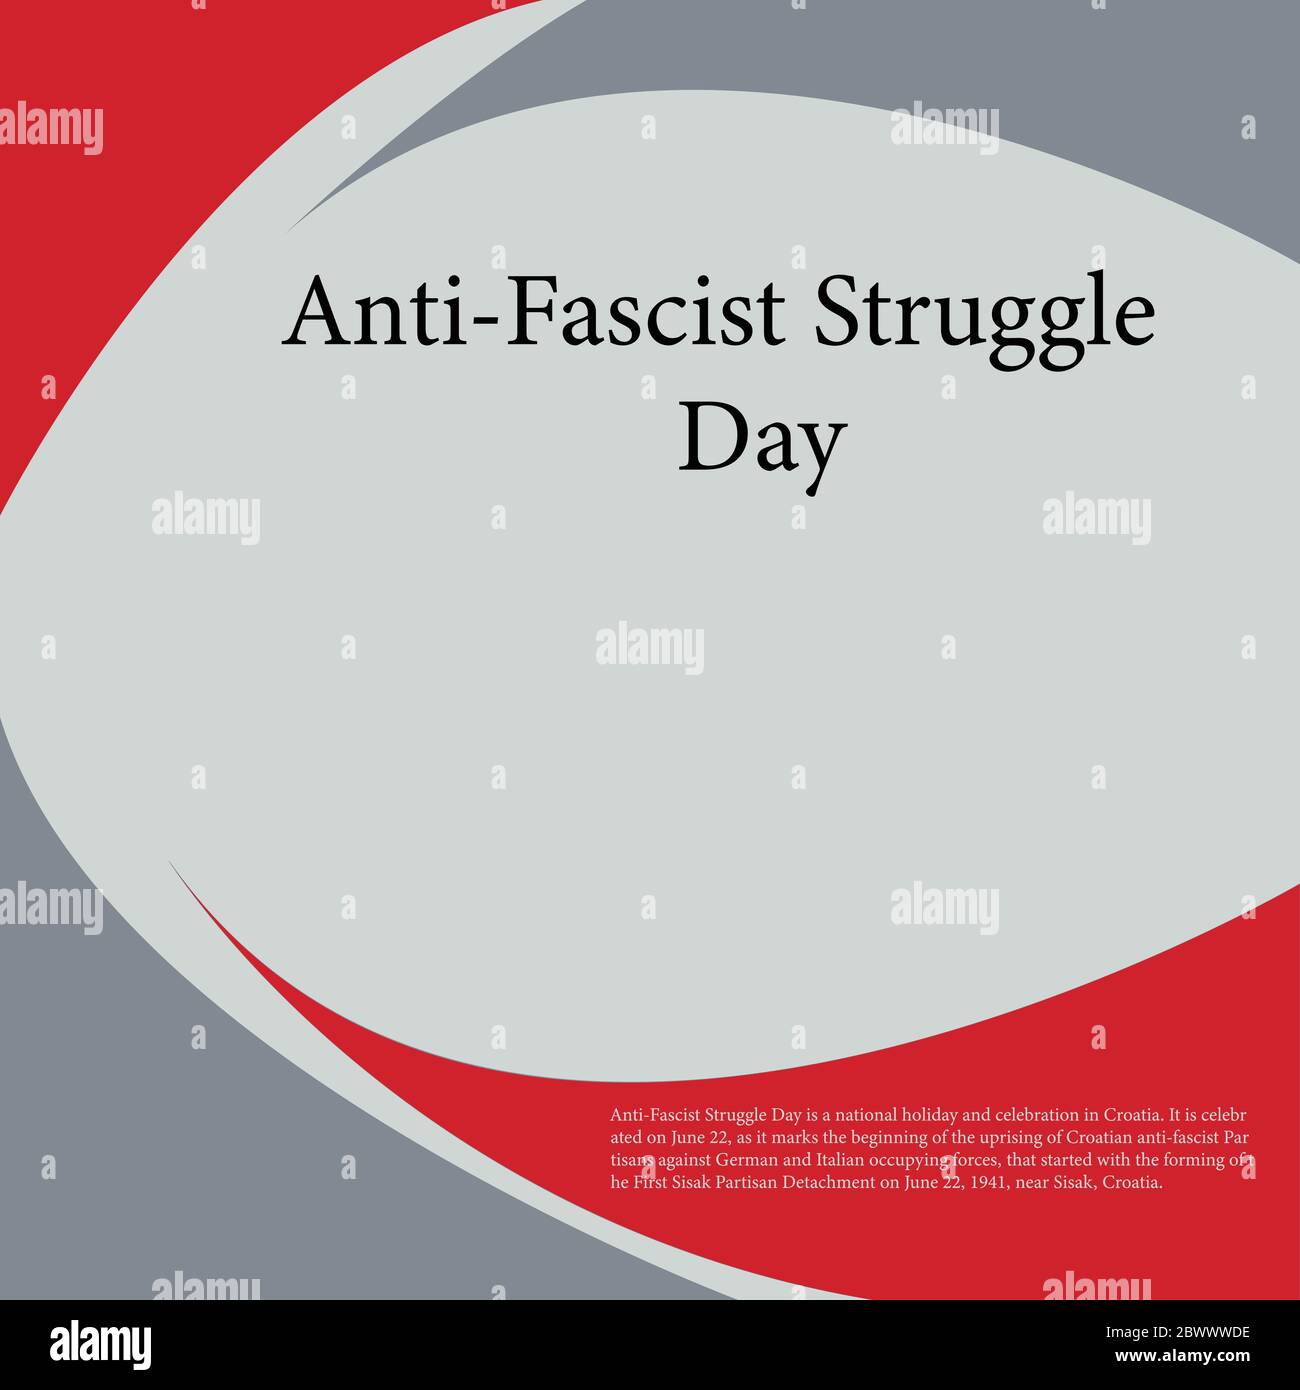 Anti-Fascist Struggle Day is a national holiday and celebration in Croatia.Holiday. Stock Vector